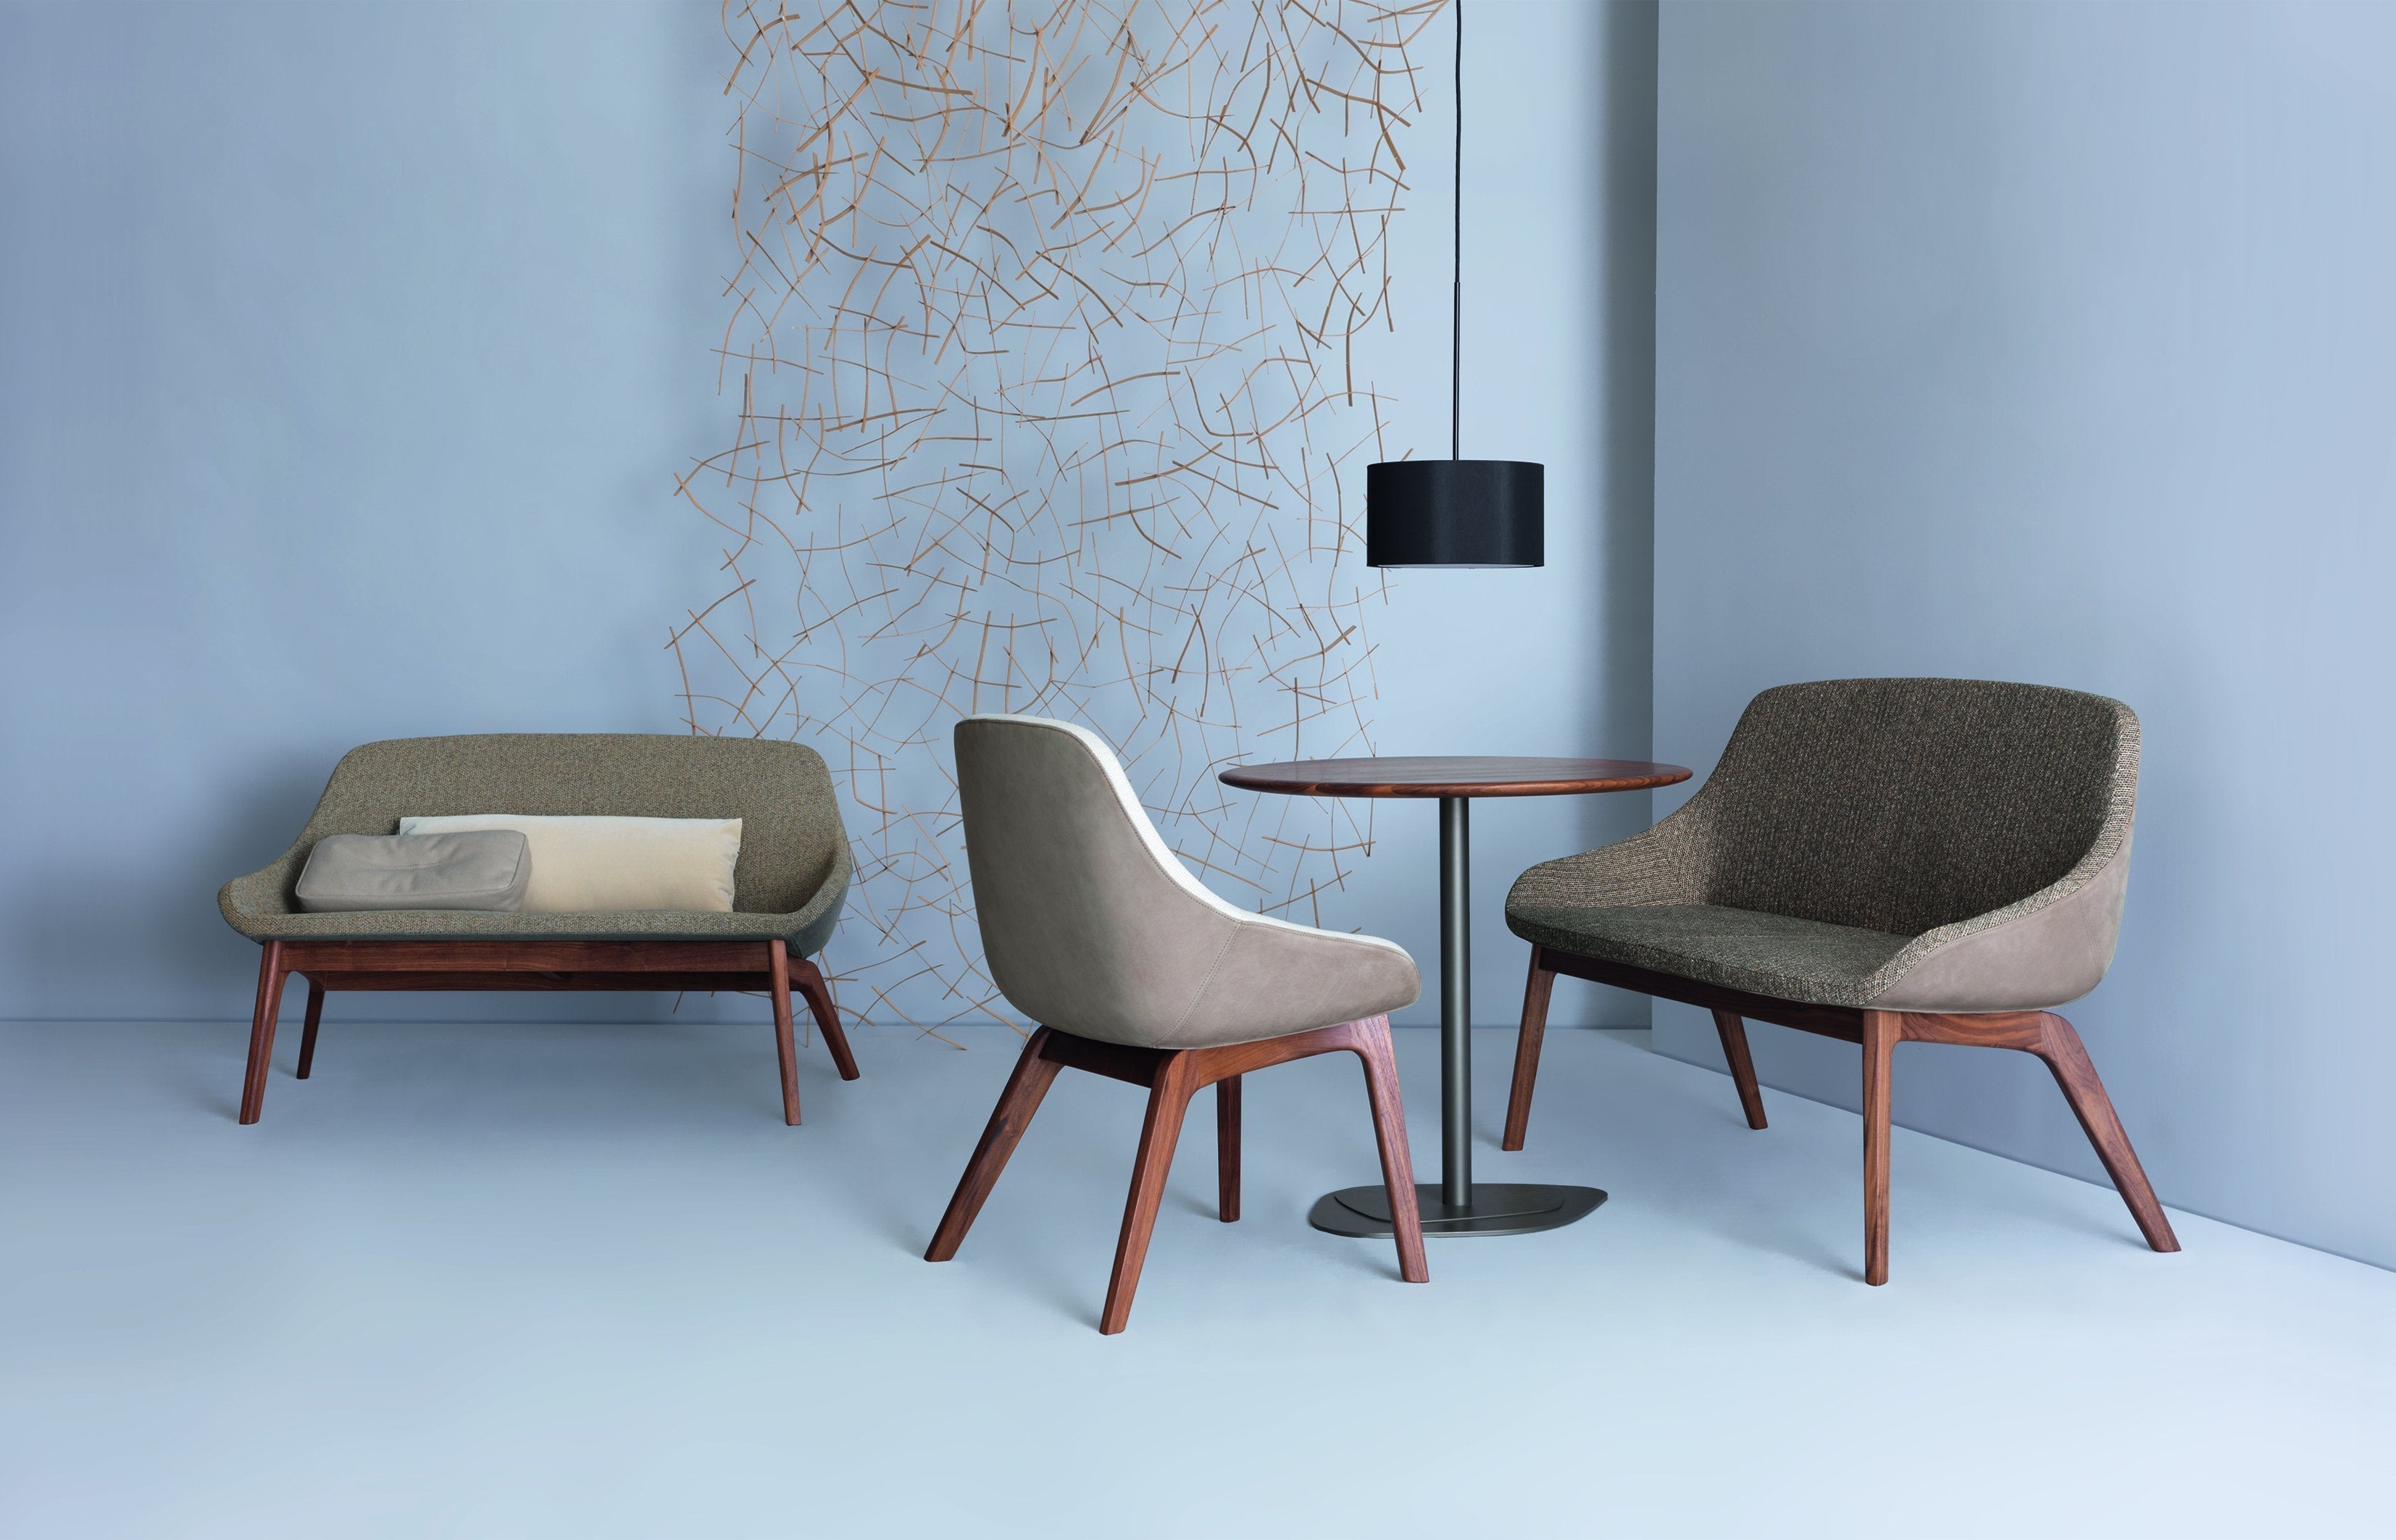 Morph Duo Dining Chair